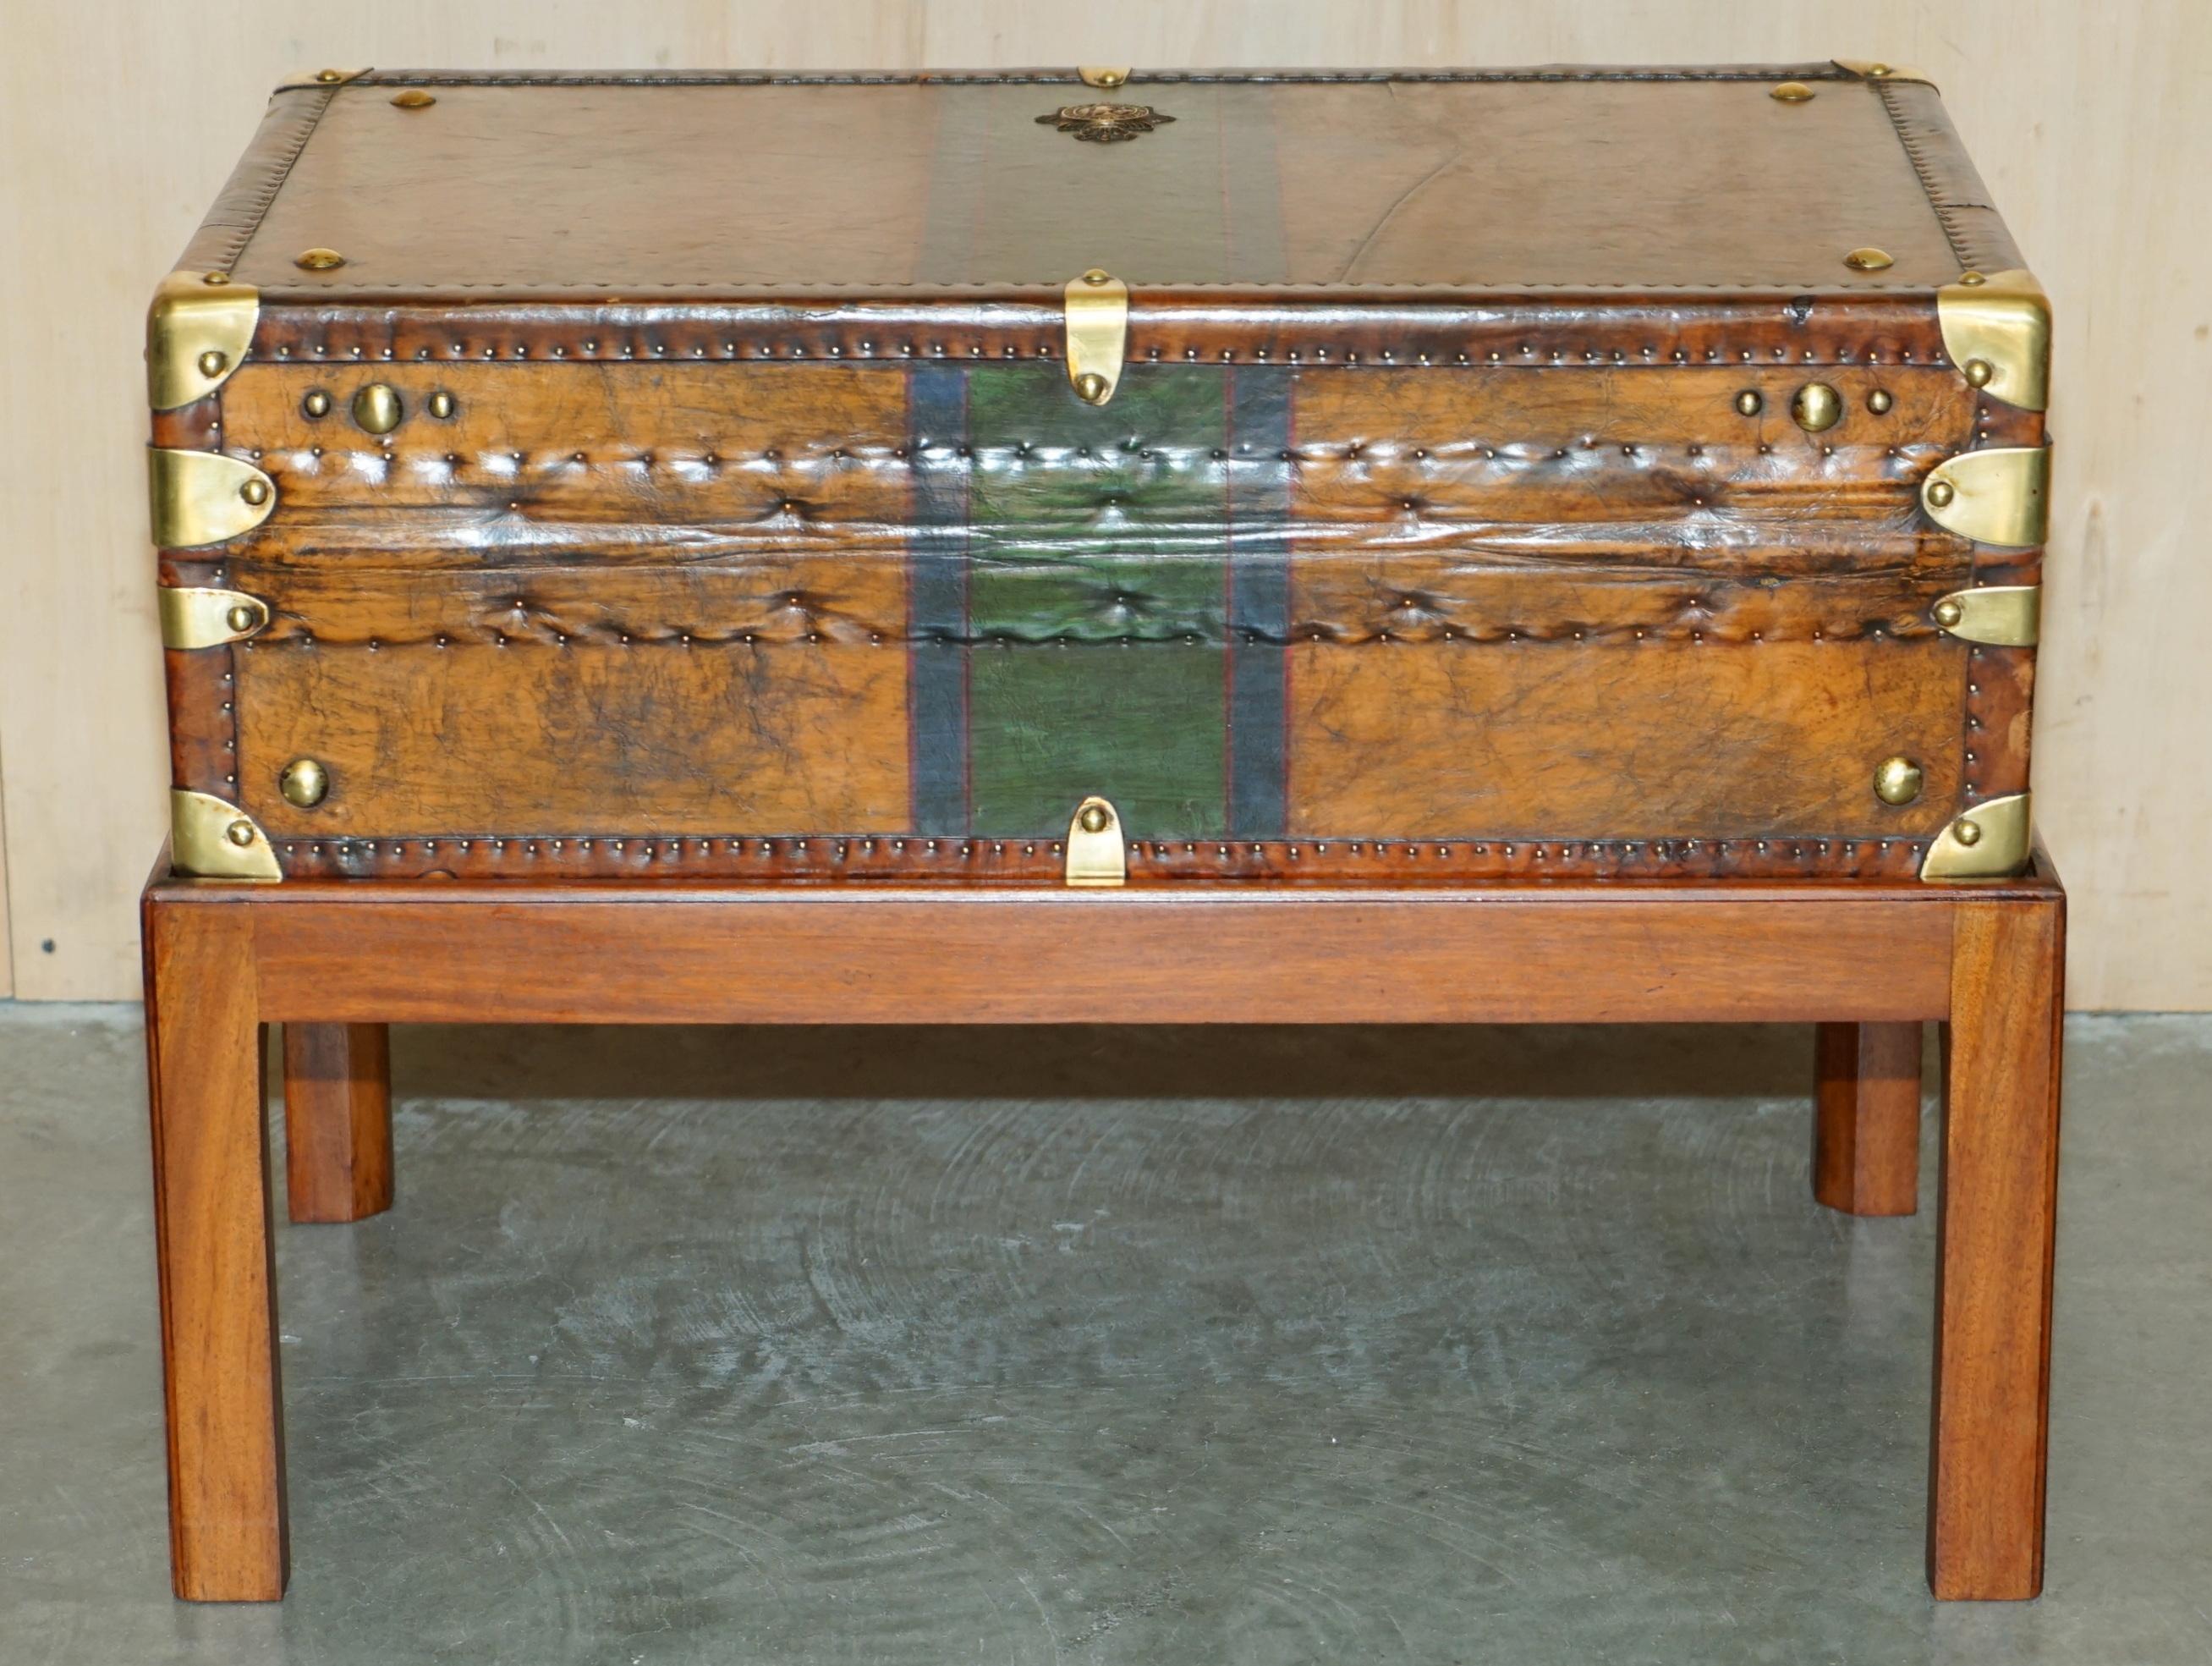 RESTORED BRITISH ARMY BROWN LEATHER TRUNK COFFEE TABLE HONI SOIT QUI MAL Y PENSe For Sale 12